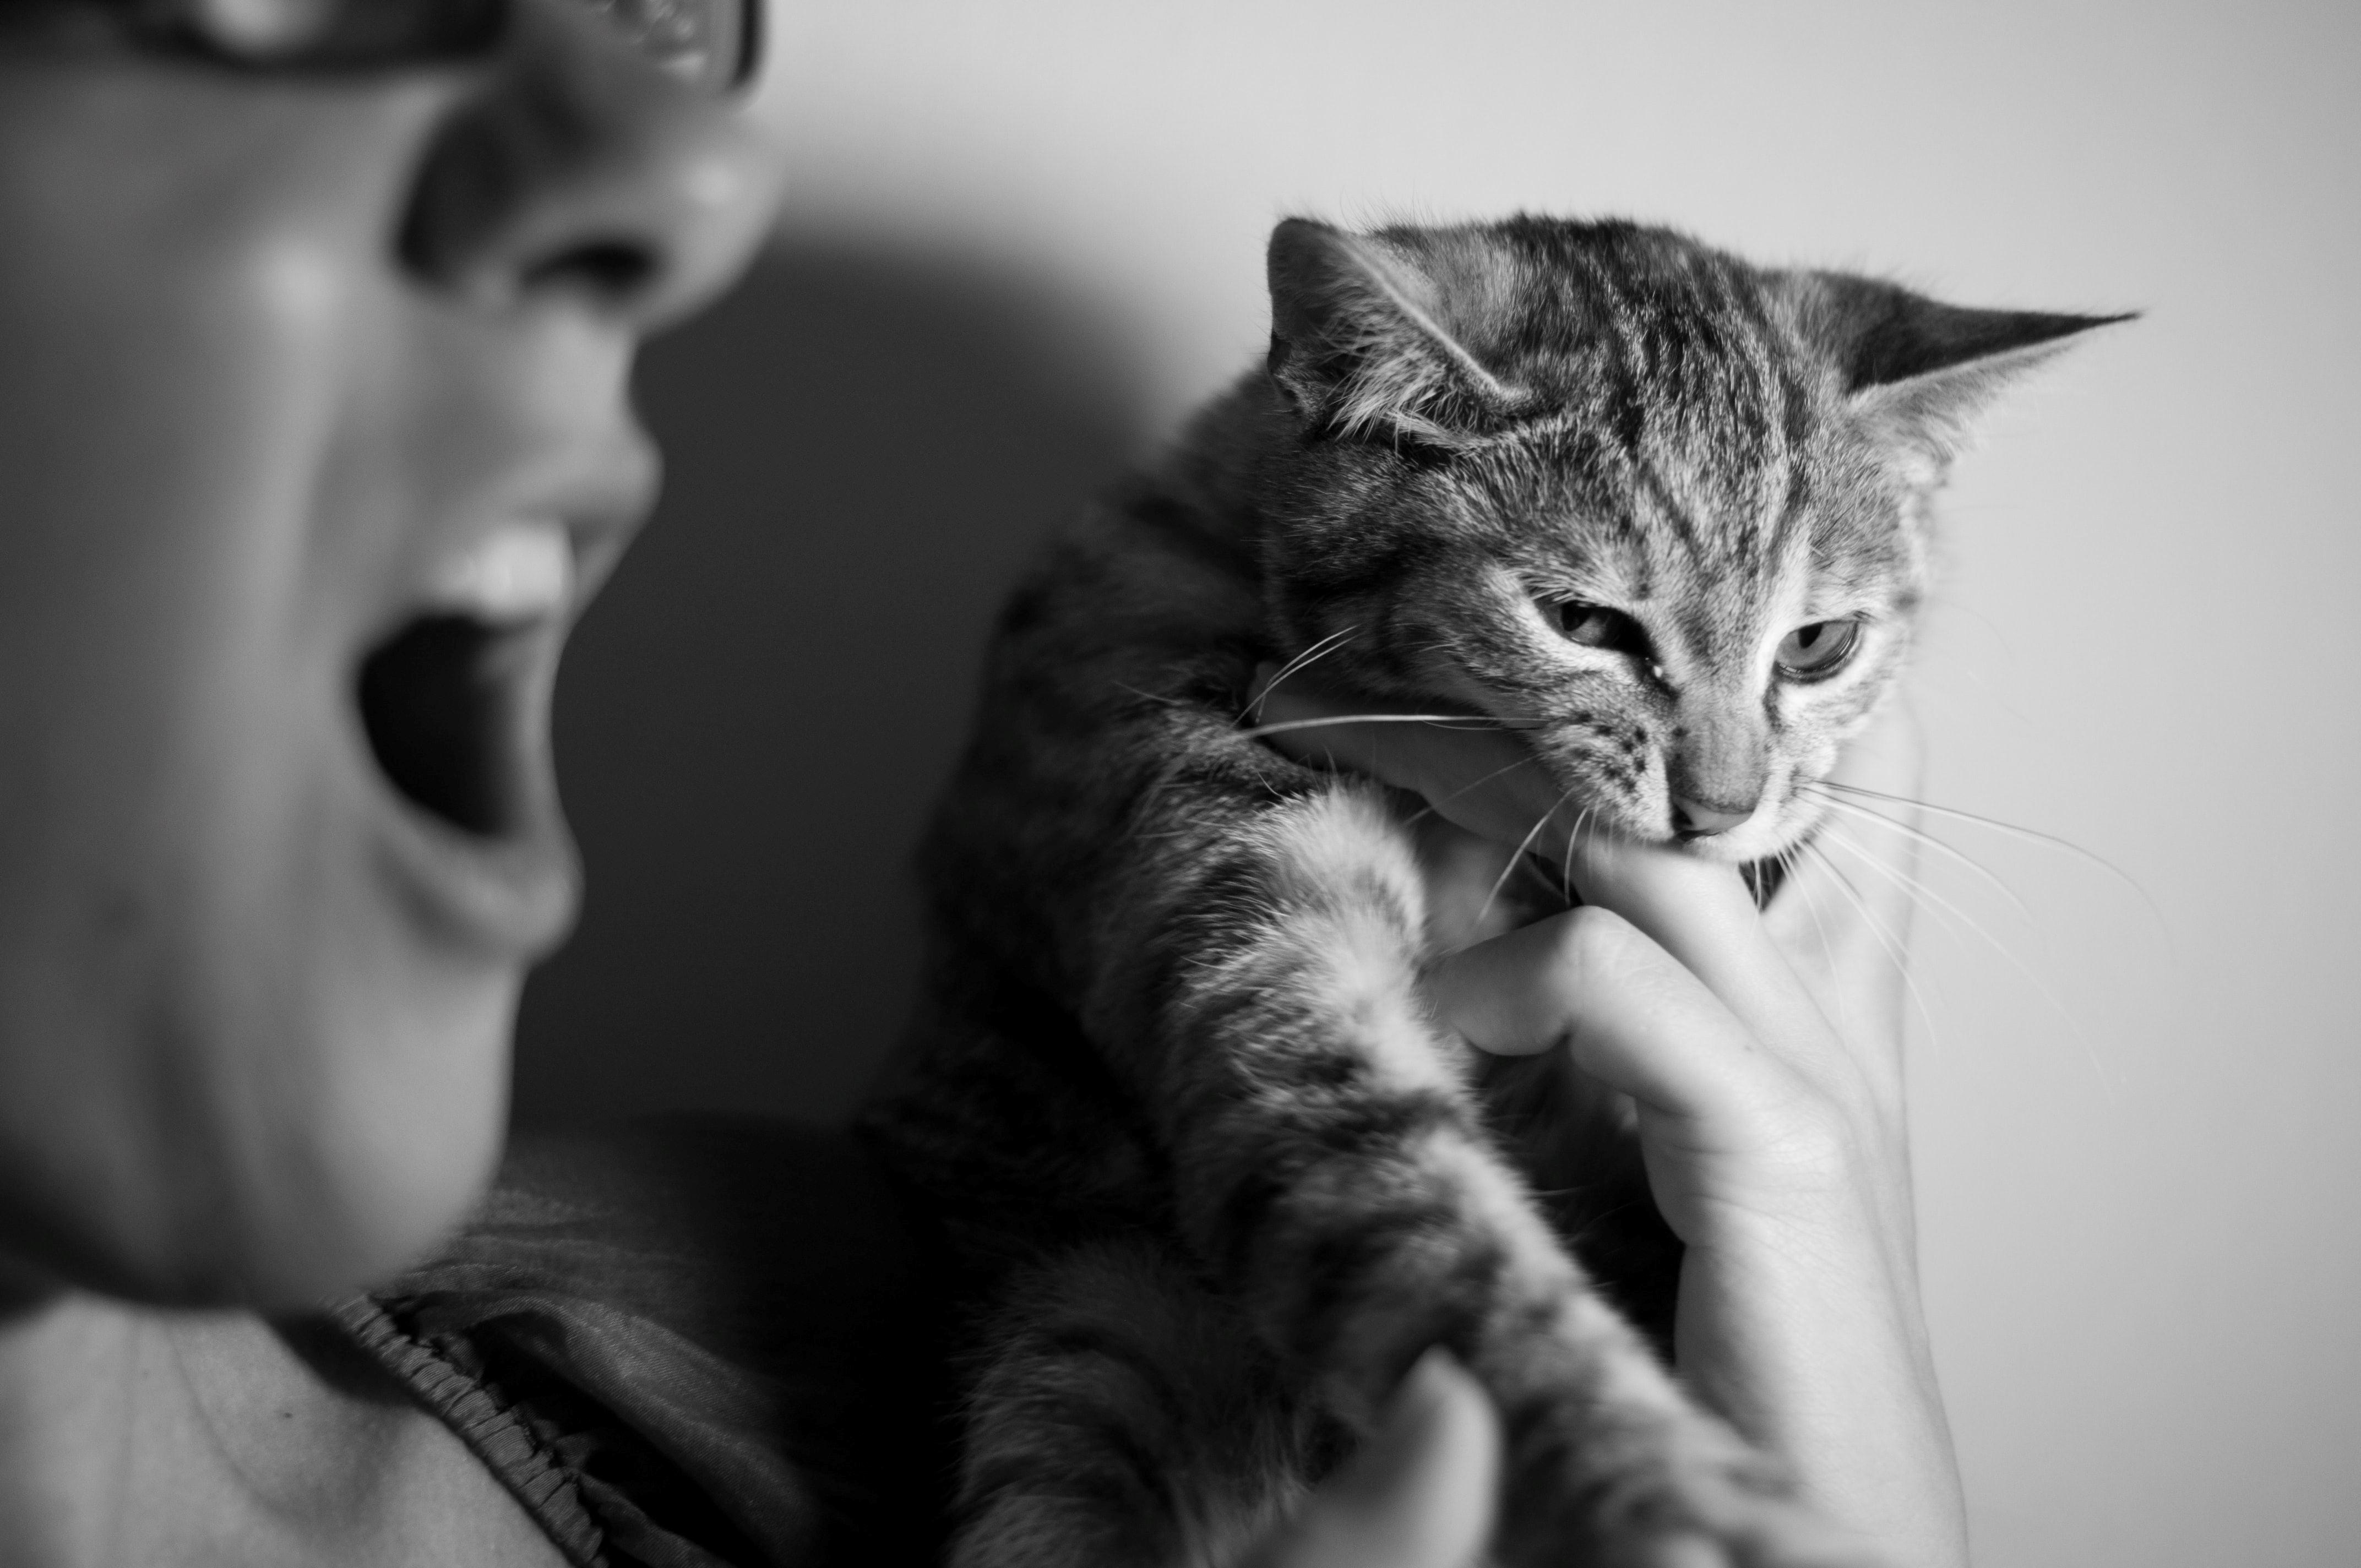 black-and-white photo of tabby cat biting a person